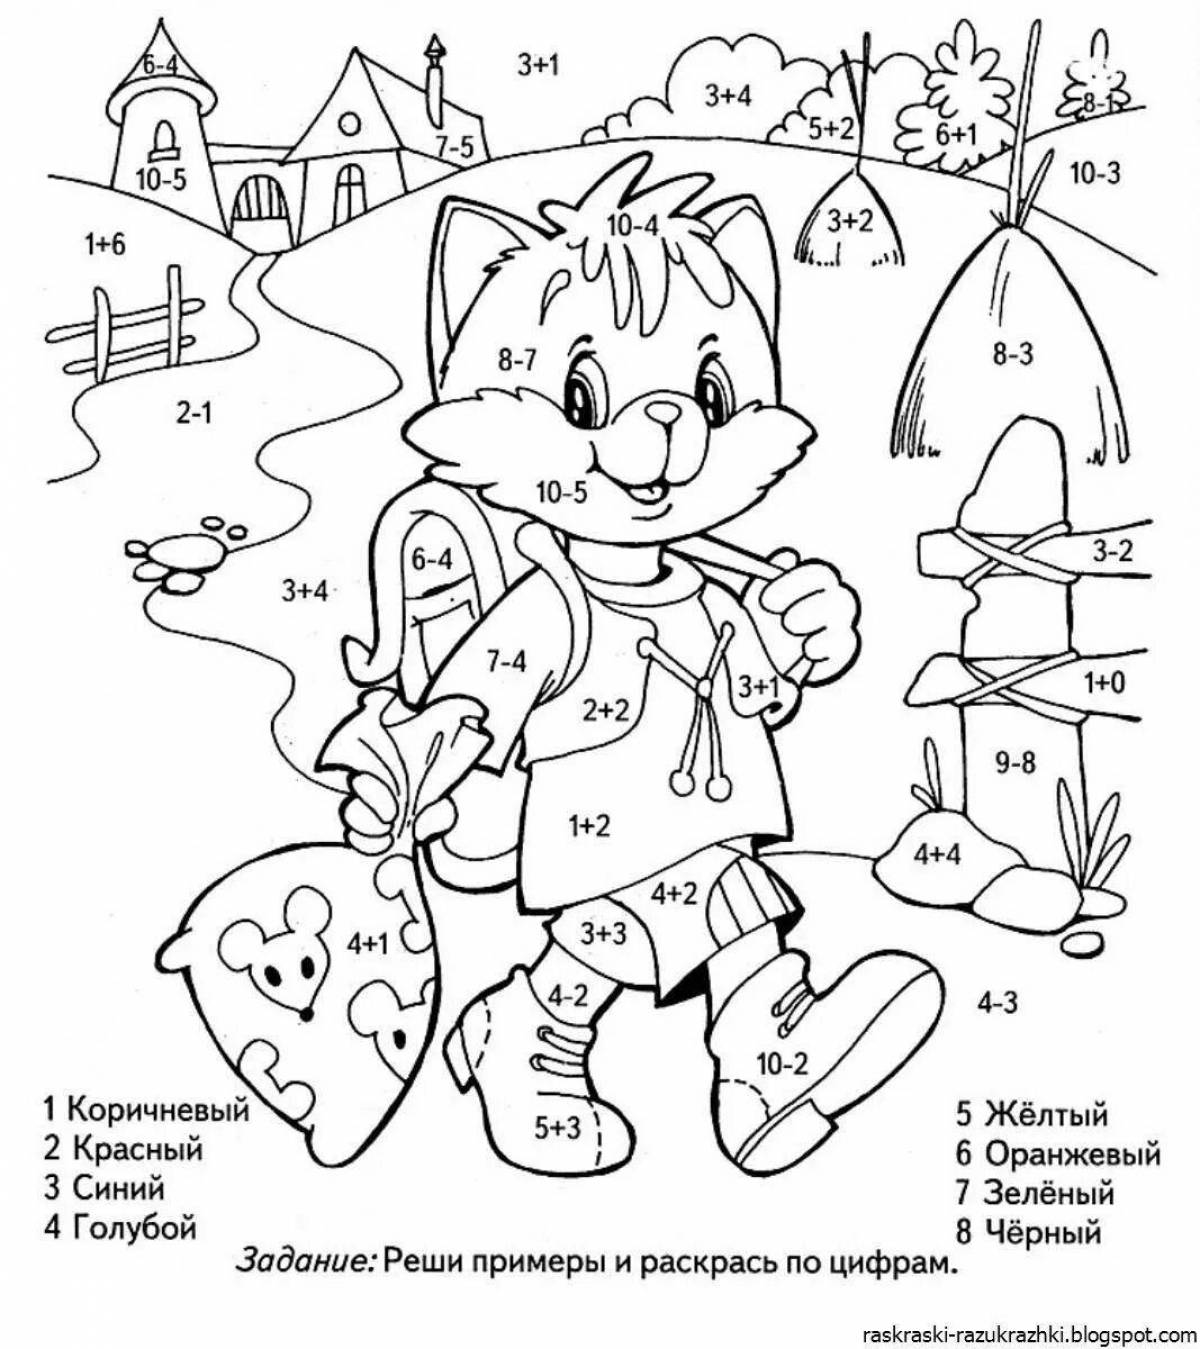 Detailed copy of the coloring page